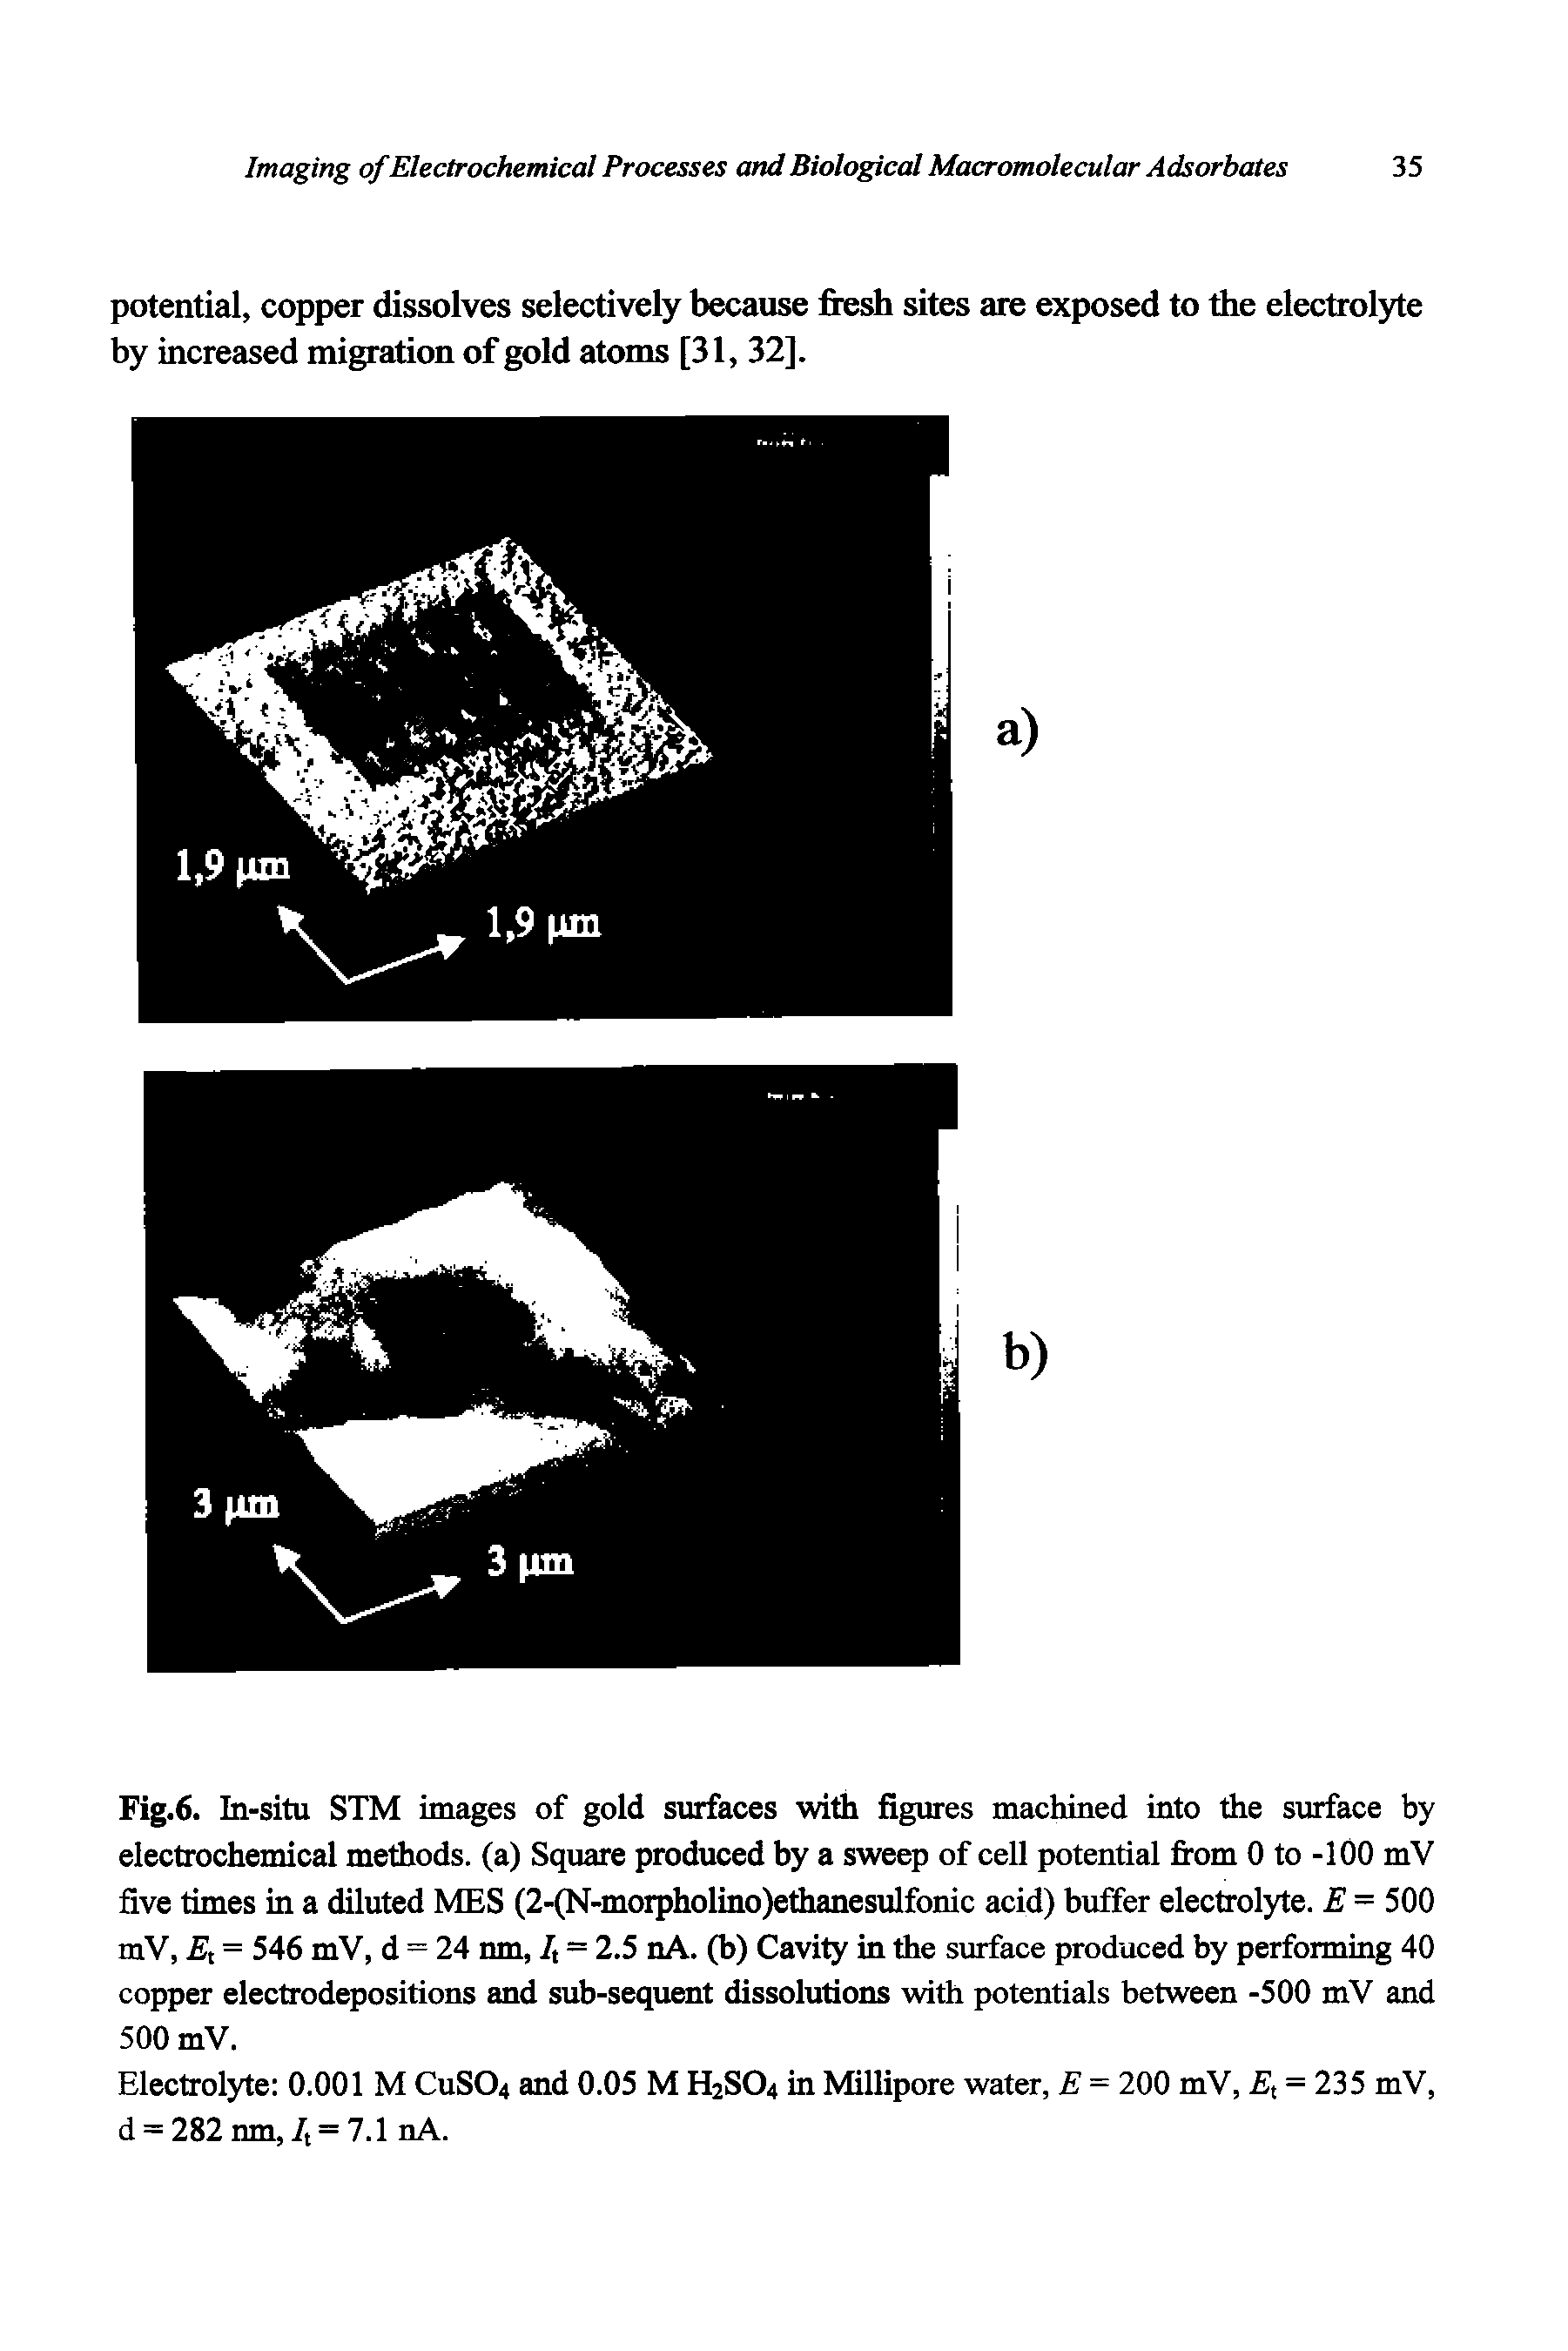 Fig.6. In-situ STM images of gold surfaces with figures machined into the surface by electrochemical methods, (a) Square produced by a sweep of cell potential fi om 0 to -100 mV five times in a diluted MBS (2-(N-moipholino)ethanesulfonic acid) buffer electrolyte. E = 500 mV, El = 546 mV, d = 24 nm, f = 2.5 nA. (b) Cavity in the surface produced by performing 40 copper electrodepositions and sub-sequent dissolutions with potentials between -500 mV and 500 mV.